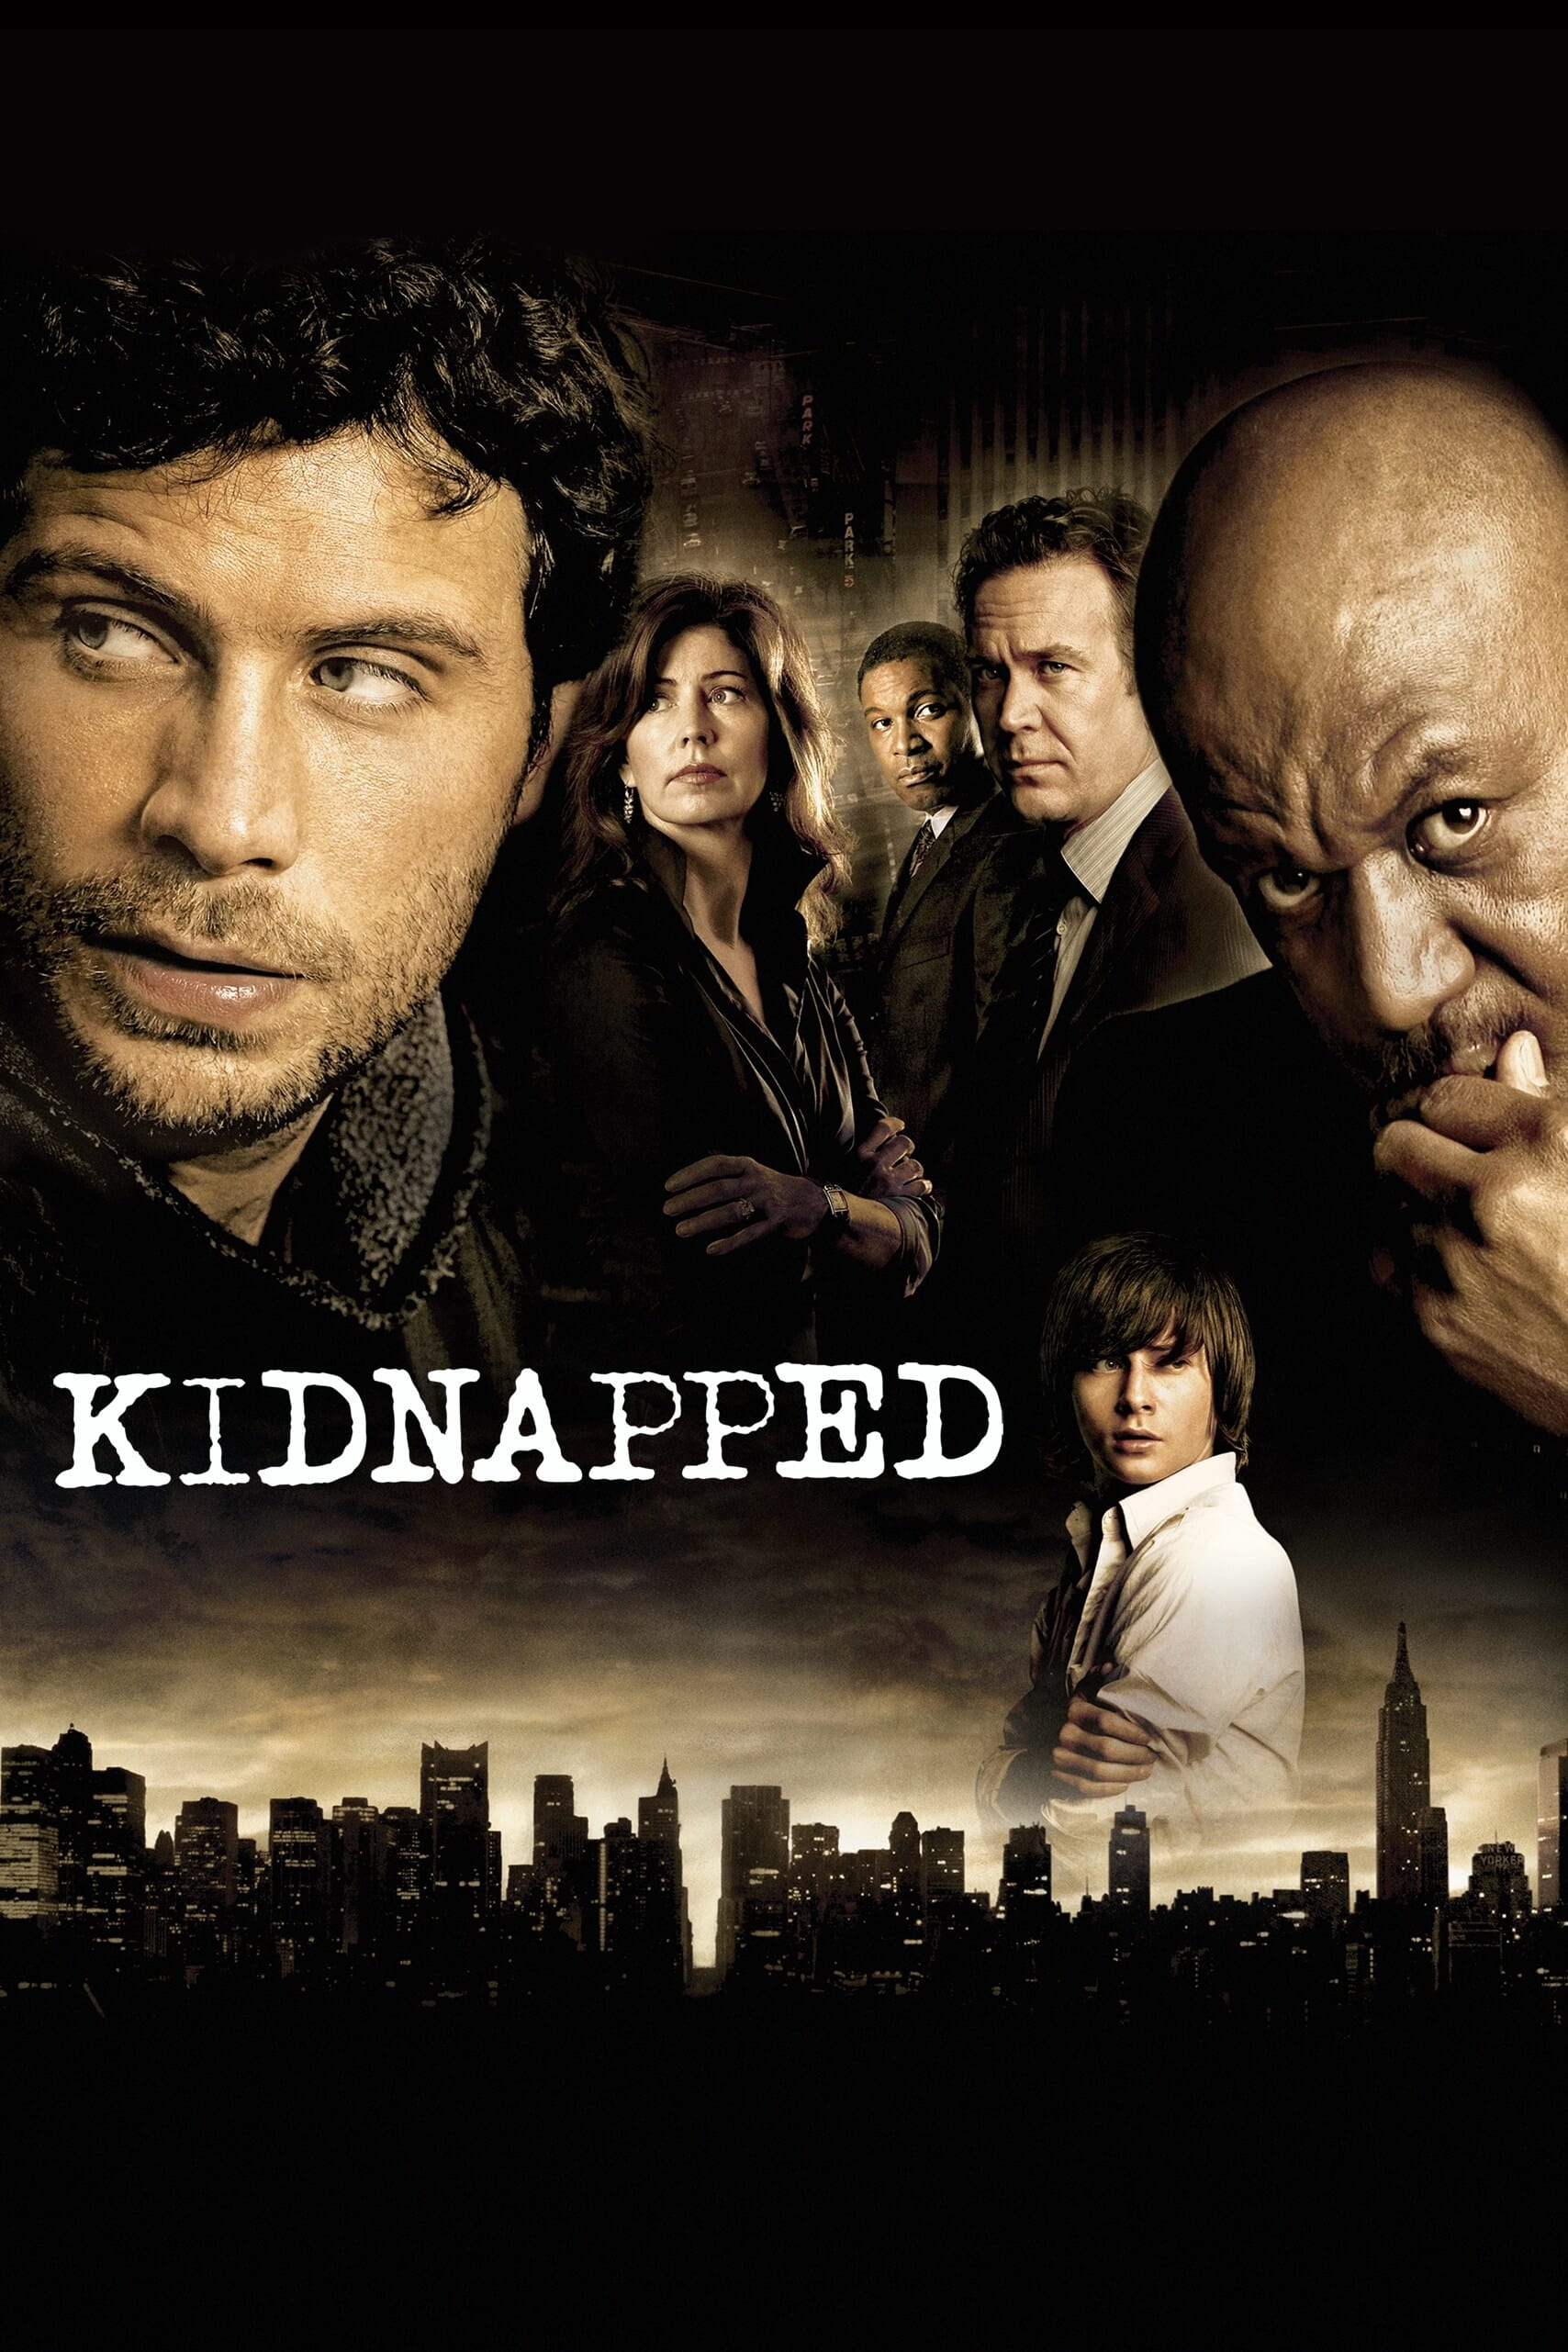 Kidnapped (2006)